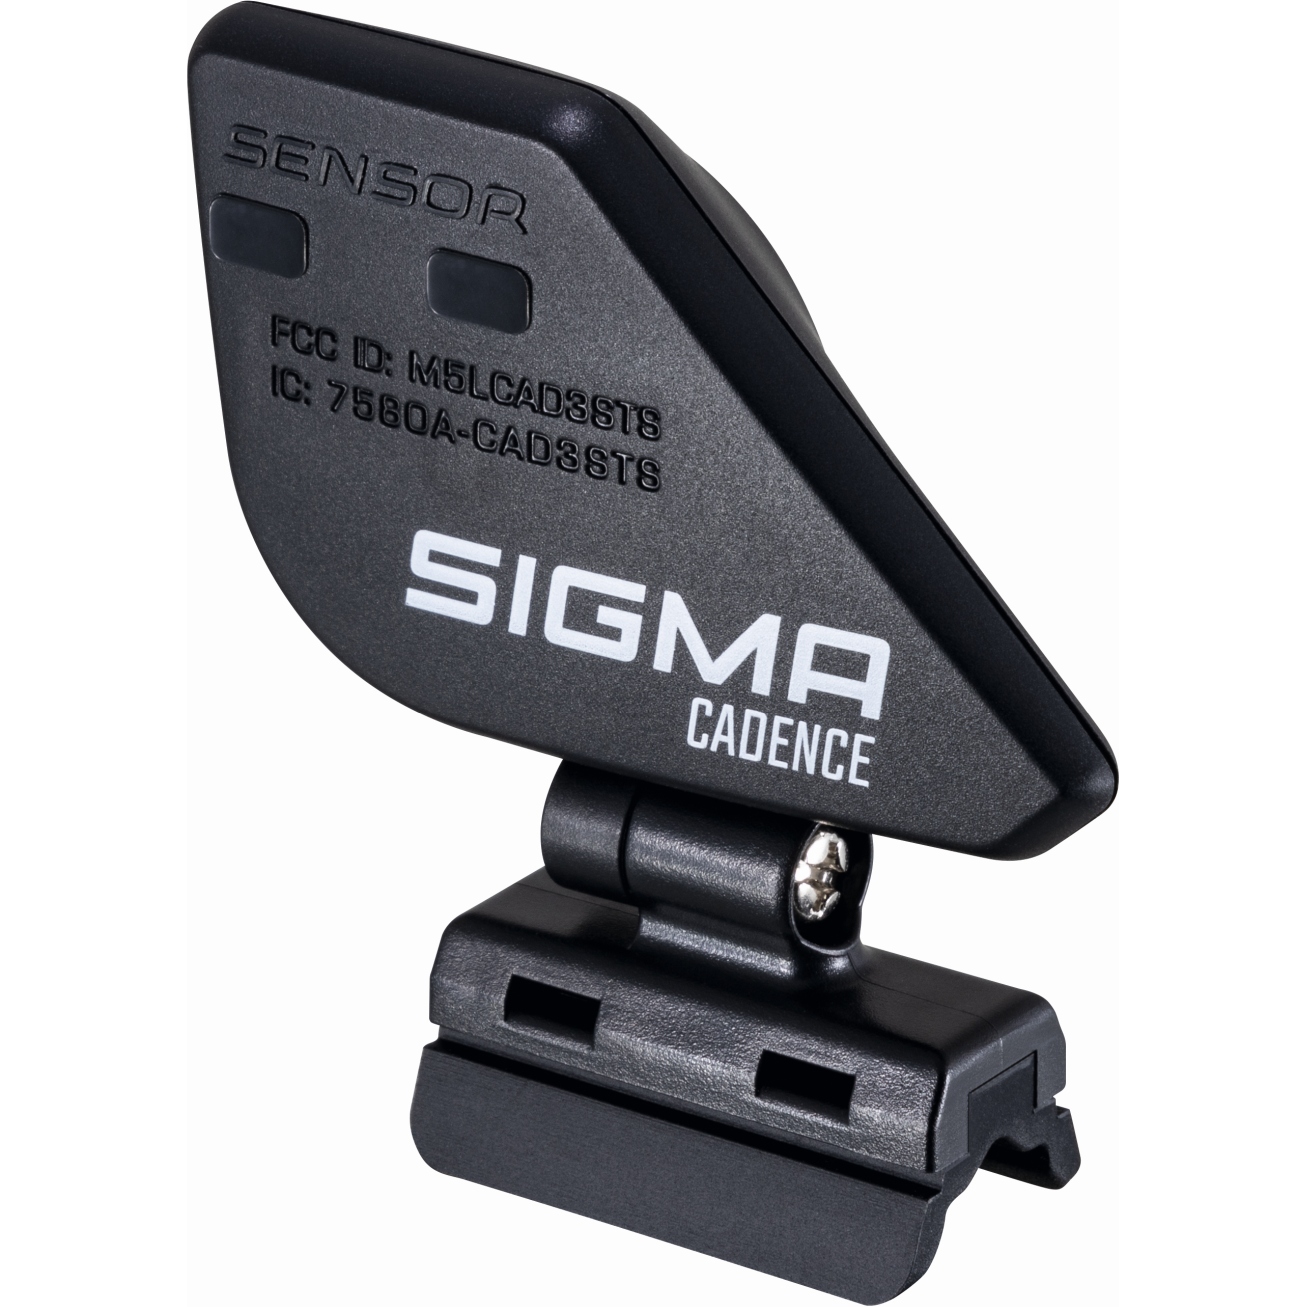 Picture of SIGMA STS Cadence Meter for BC 12.0 WL CAD, 14.0 WL CAD